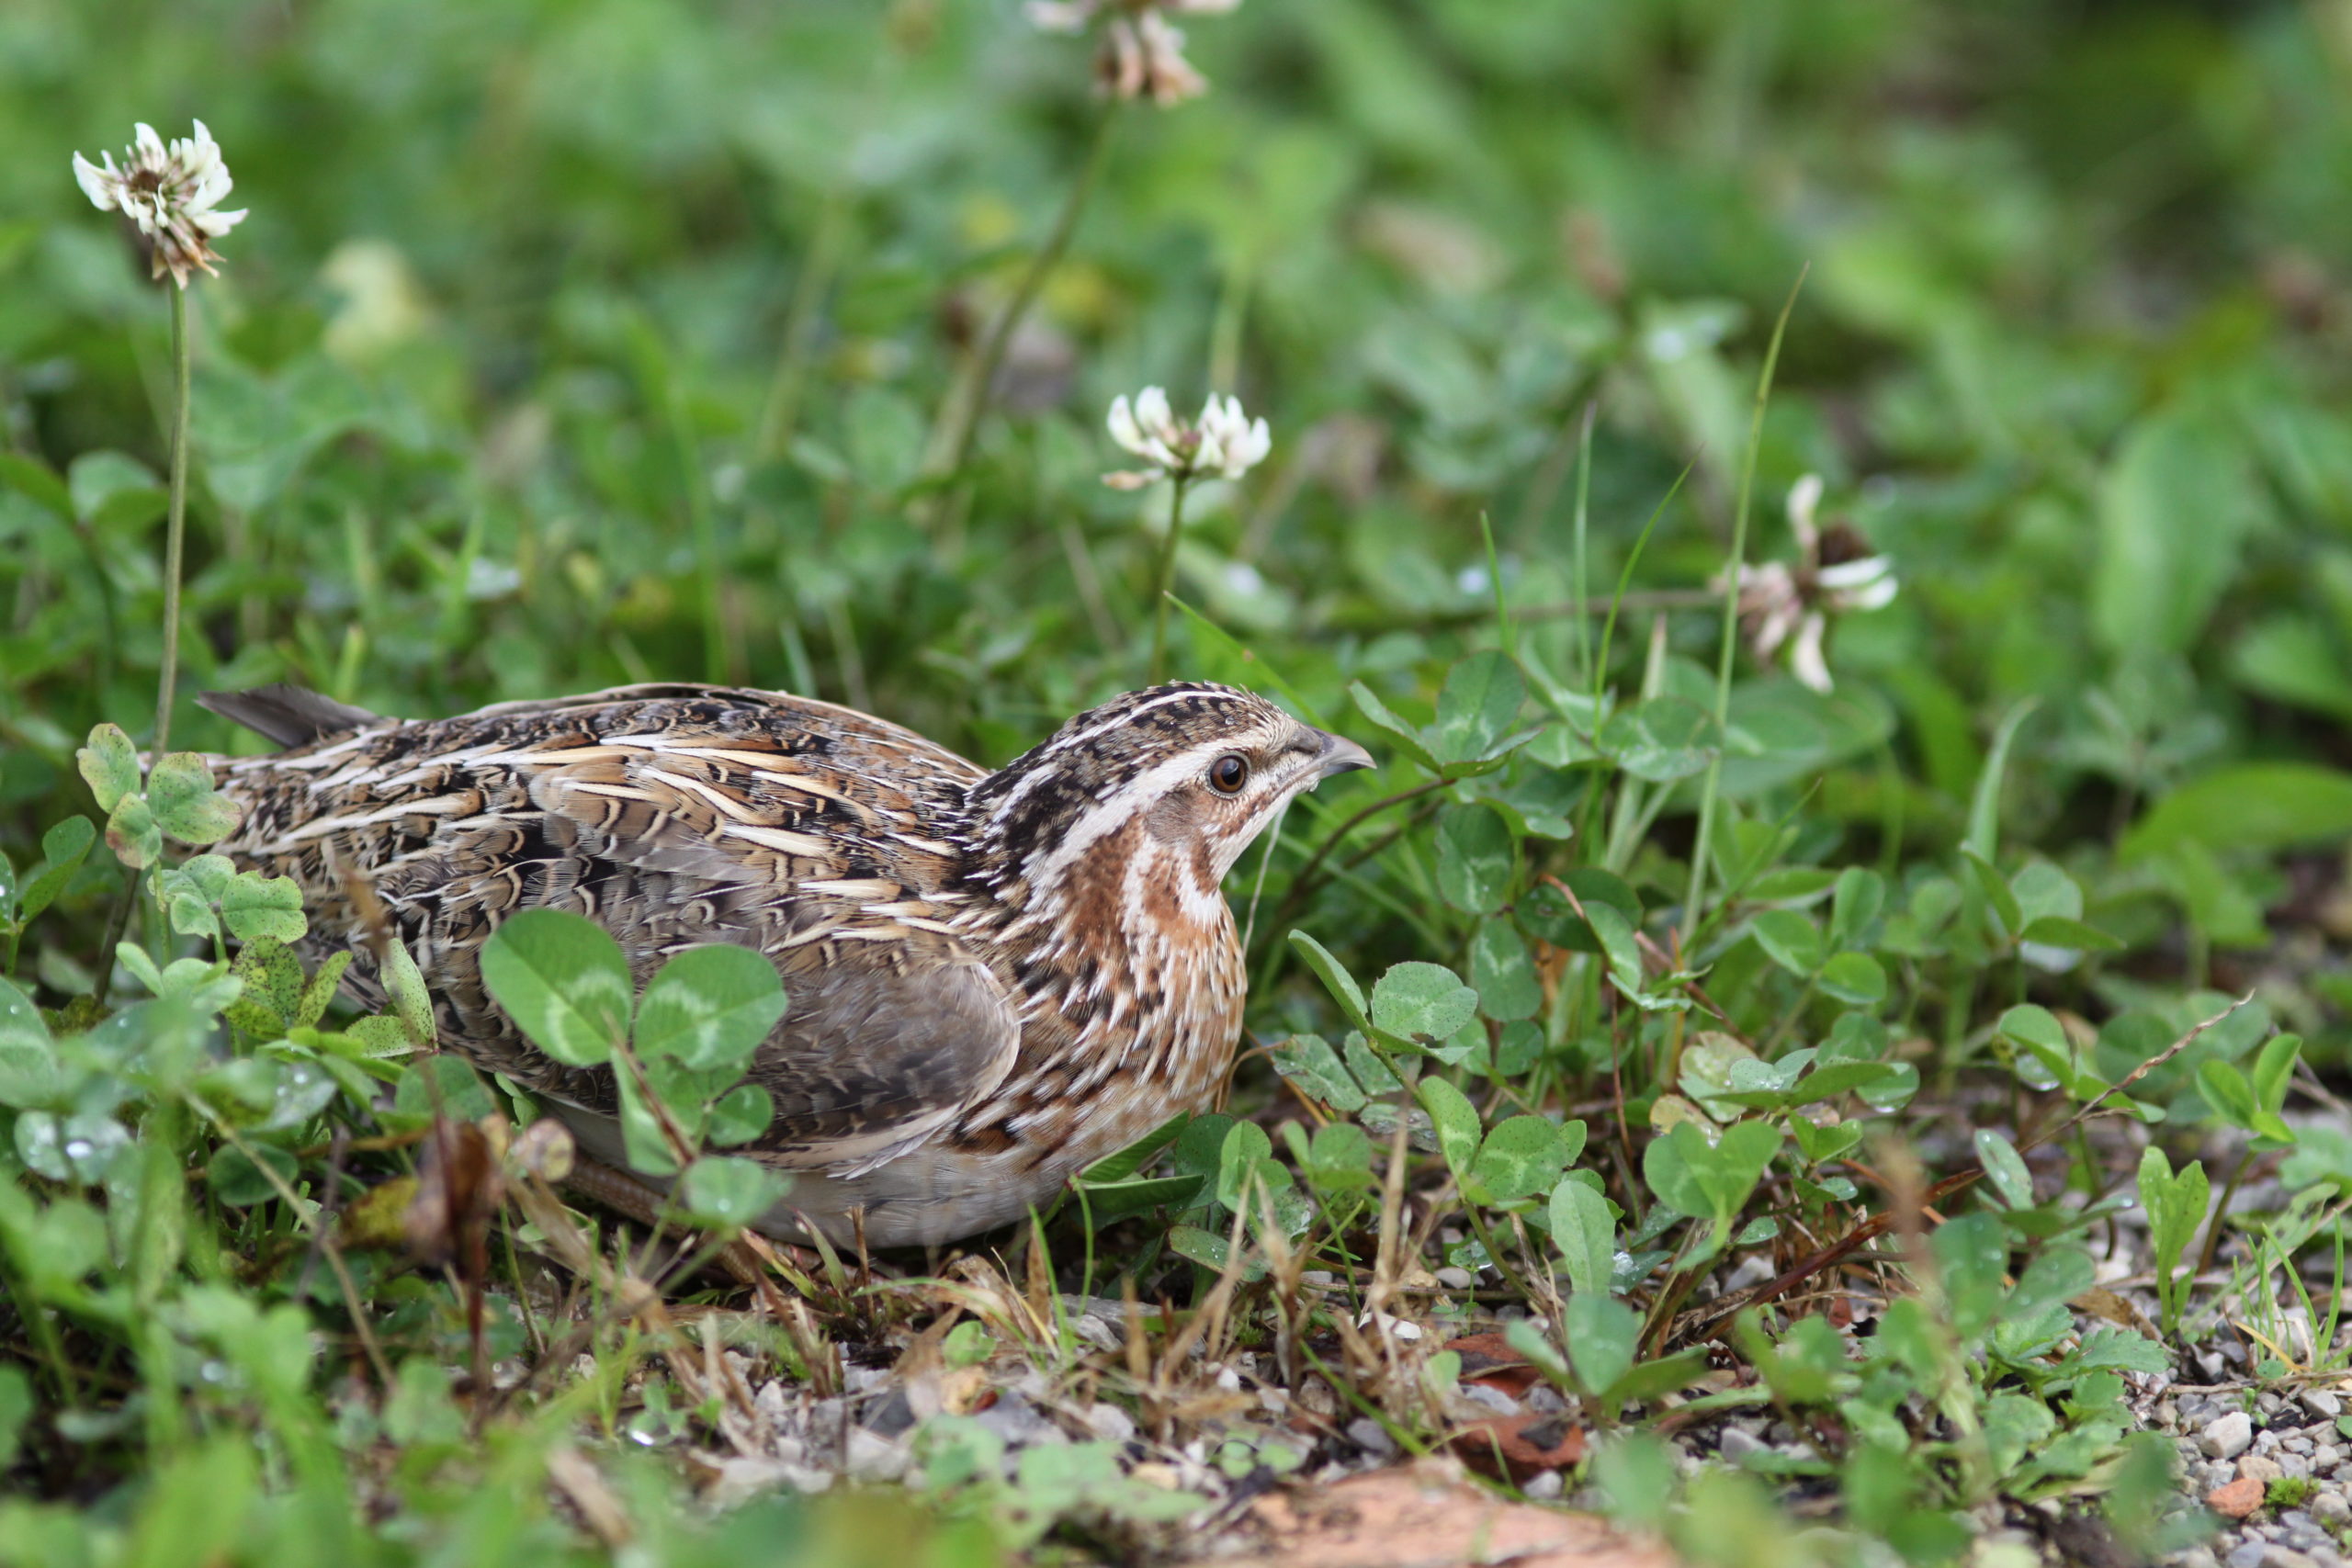 Common quail: A #FlightforSurvival under the threat of illegal hunting